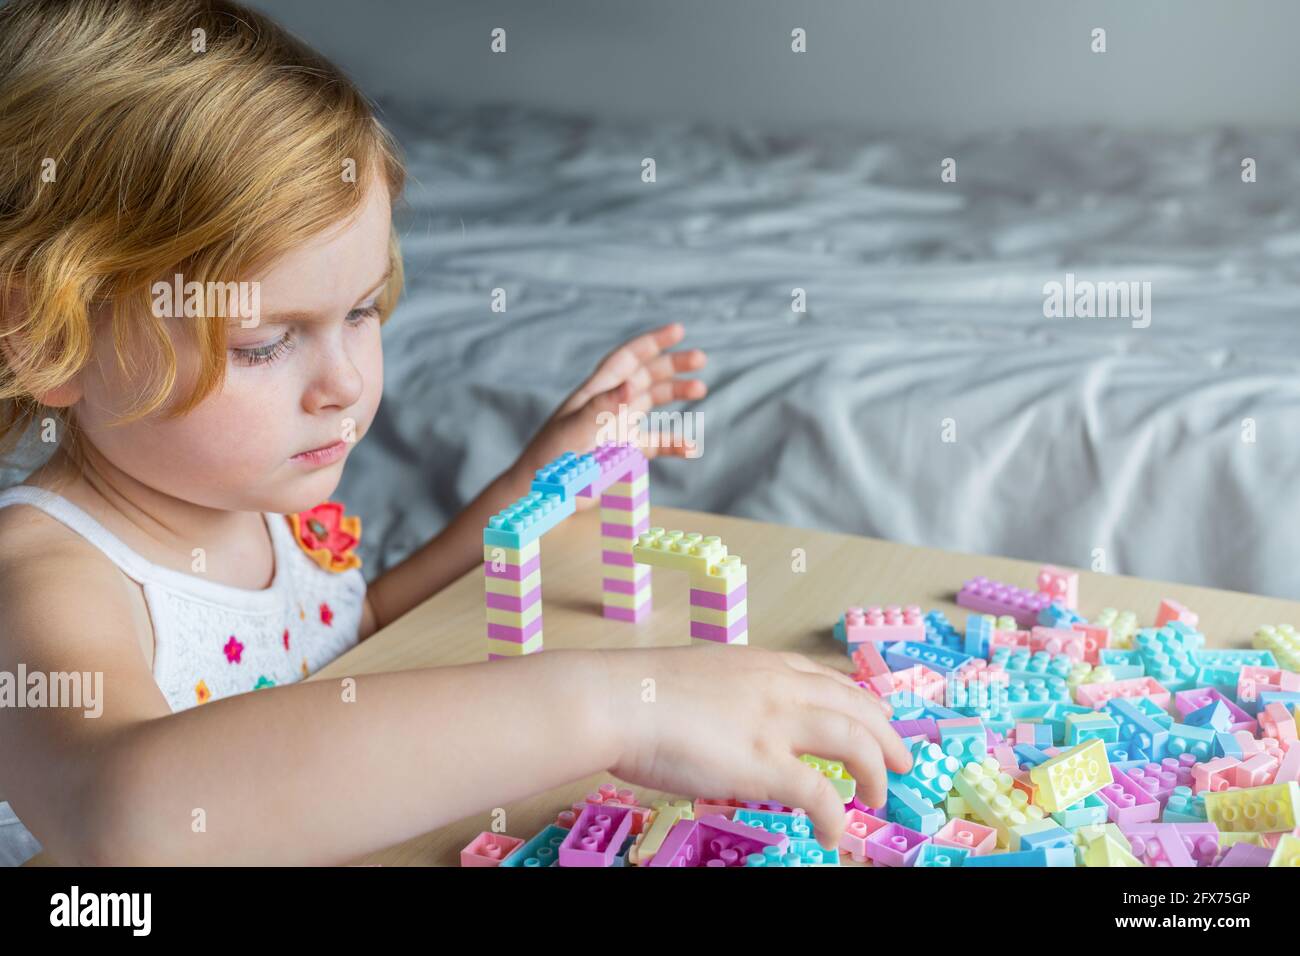 Little beautiful girl playing with toy plastic building blocks, sitting at the table. Small child busy with fun creative leisure activity. Development Stock Photo